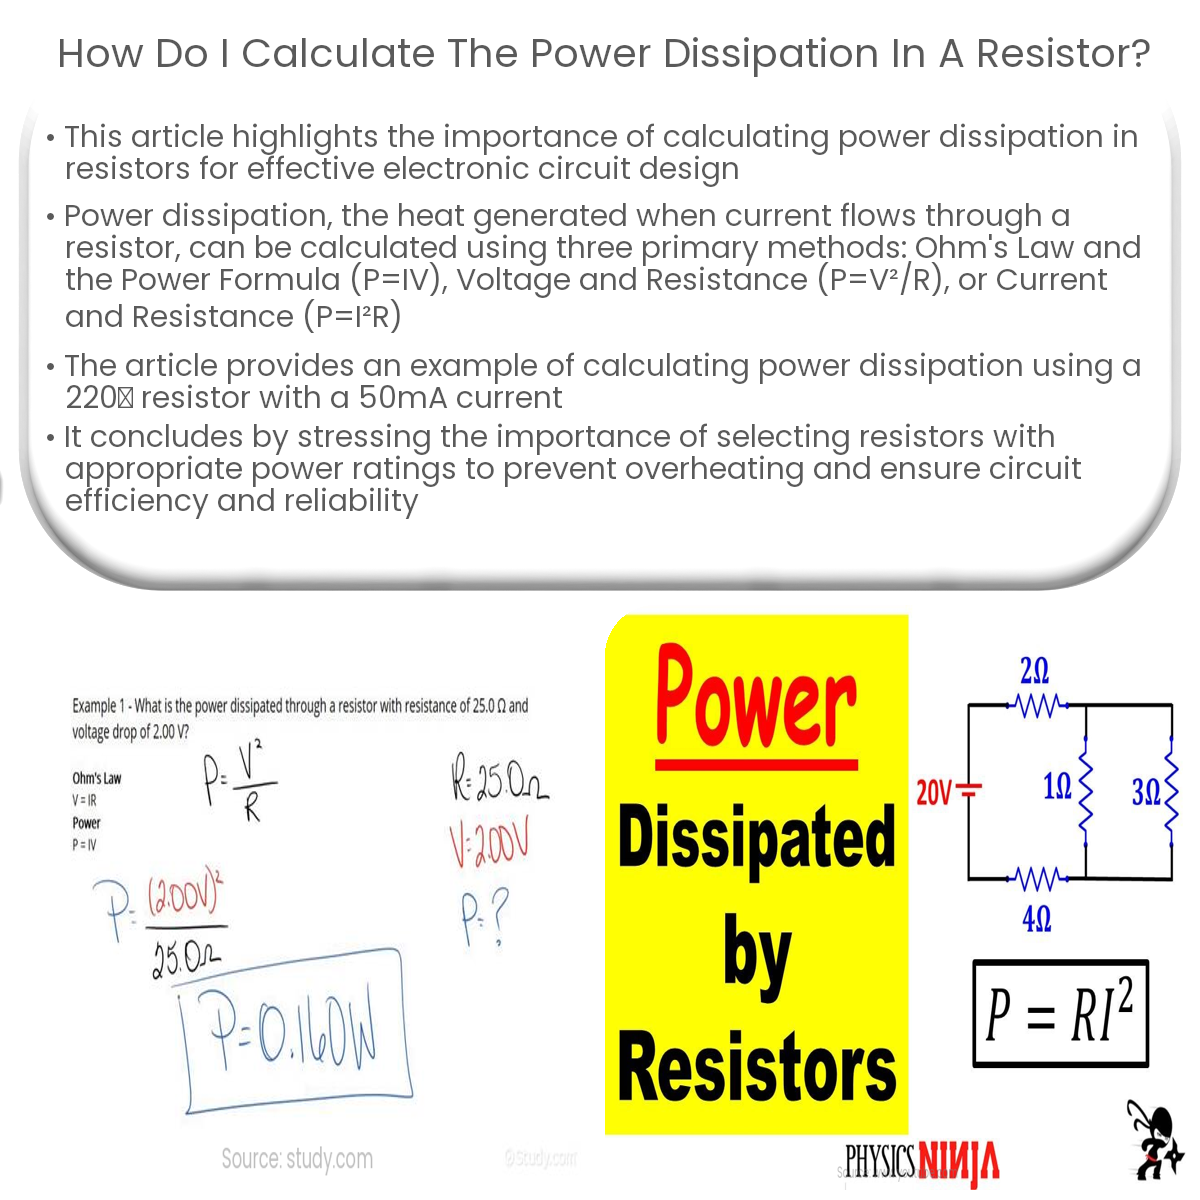 How do I calculate the power dissipation in a resistor?